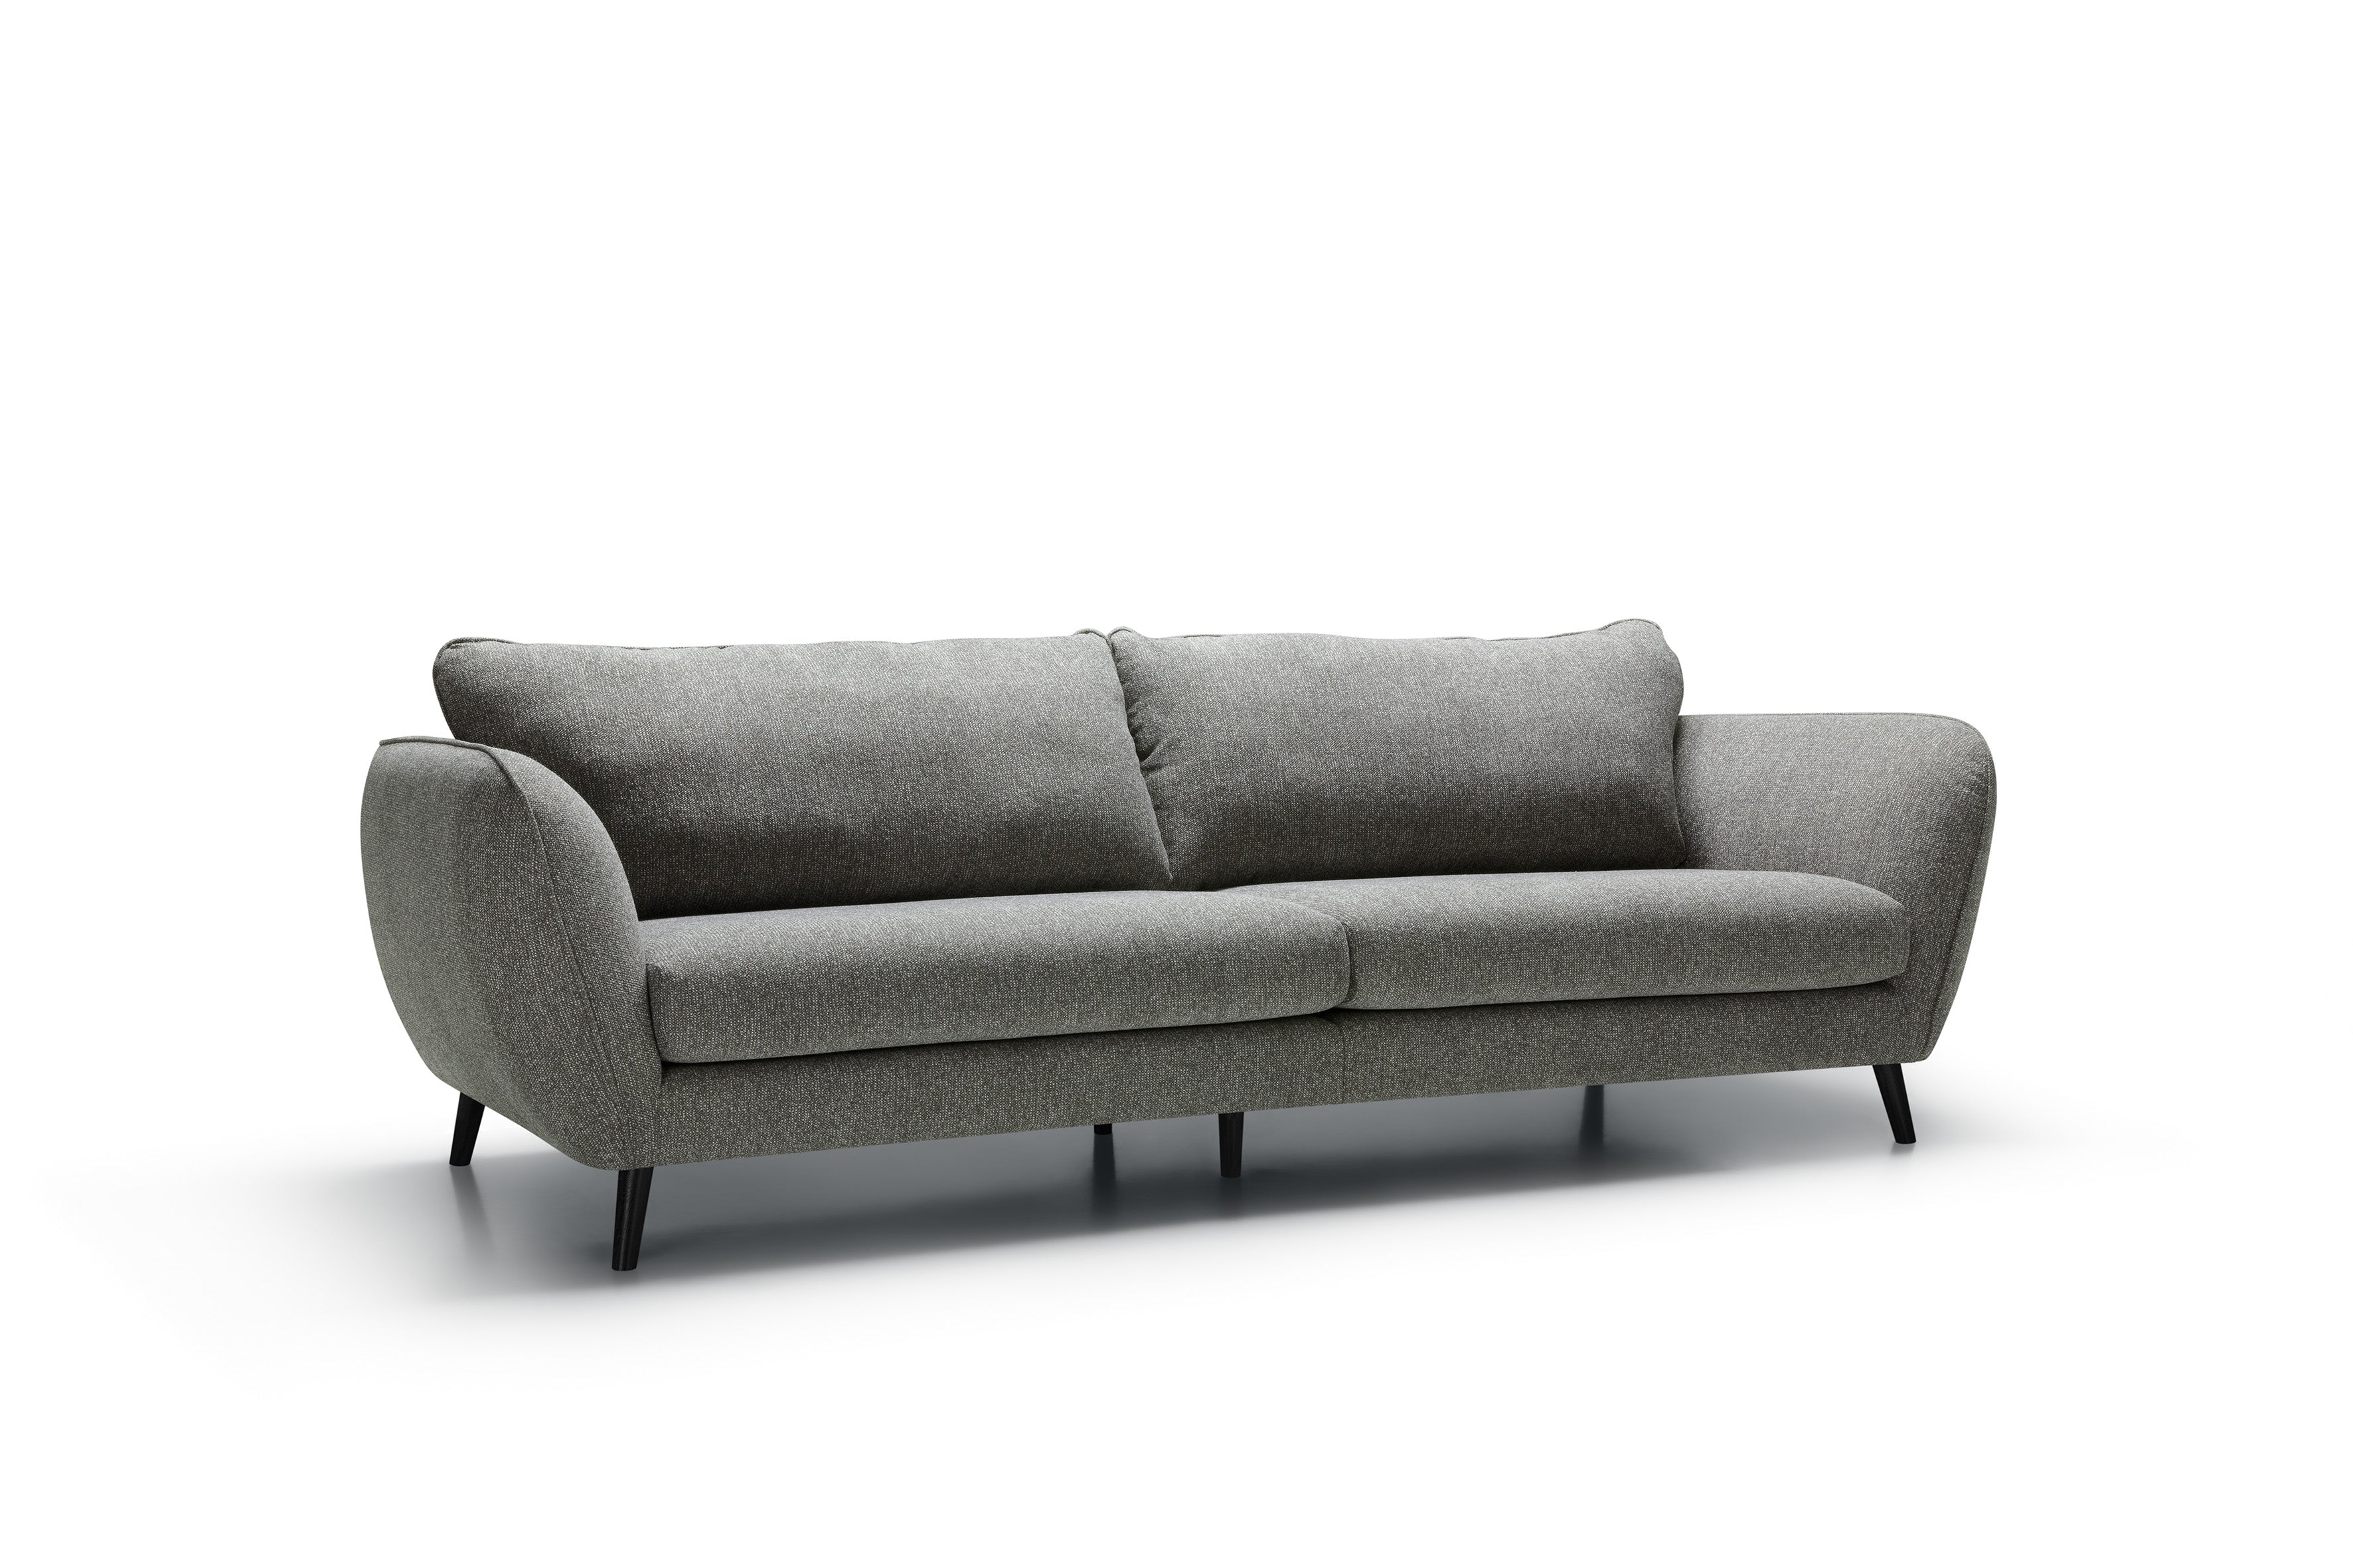 Mastrella Eve 3 XL seater divided with two seat cushions